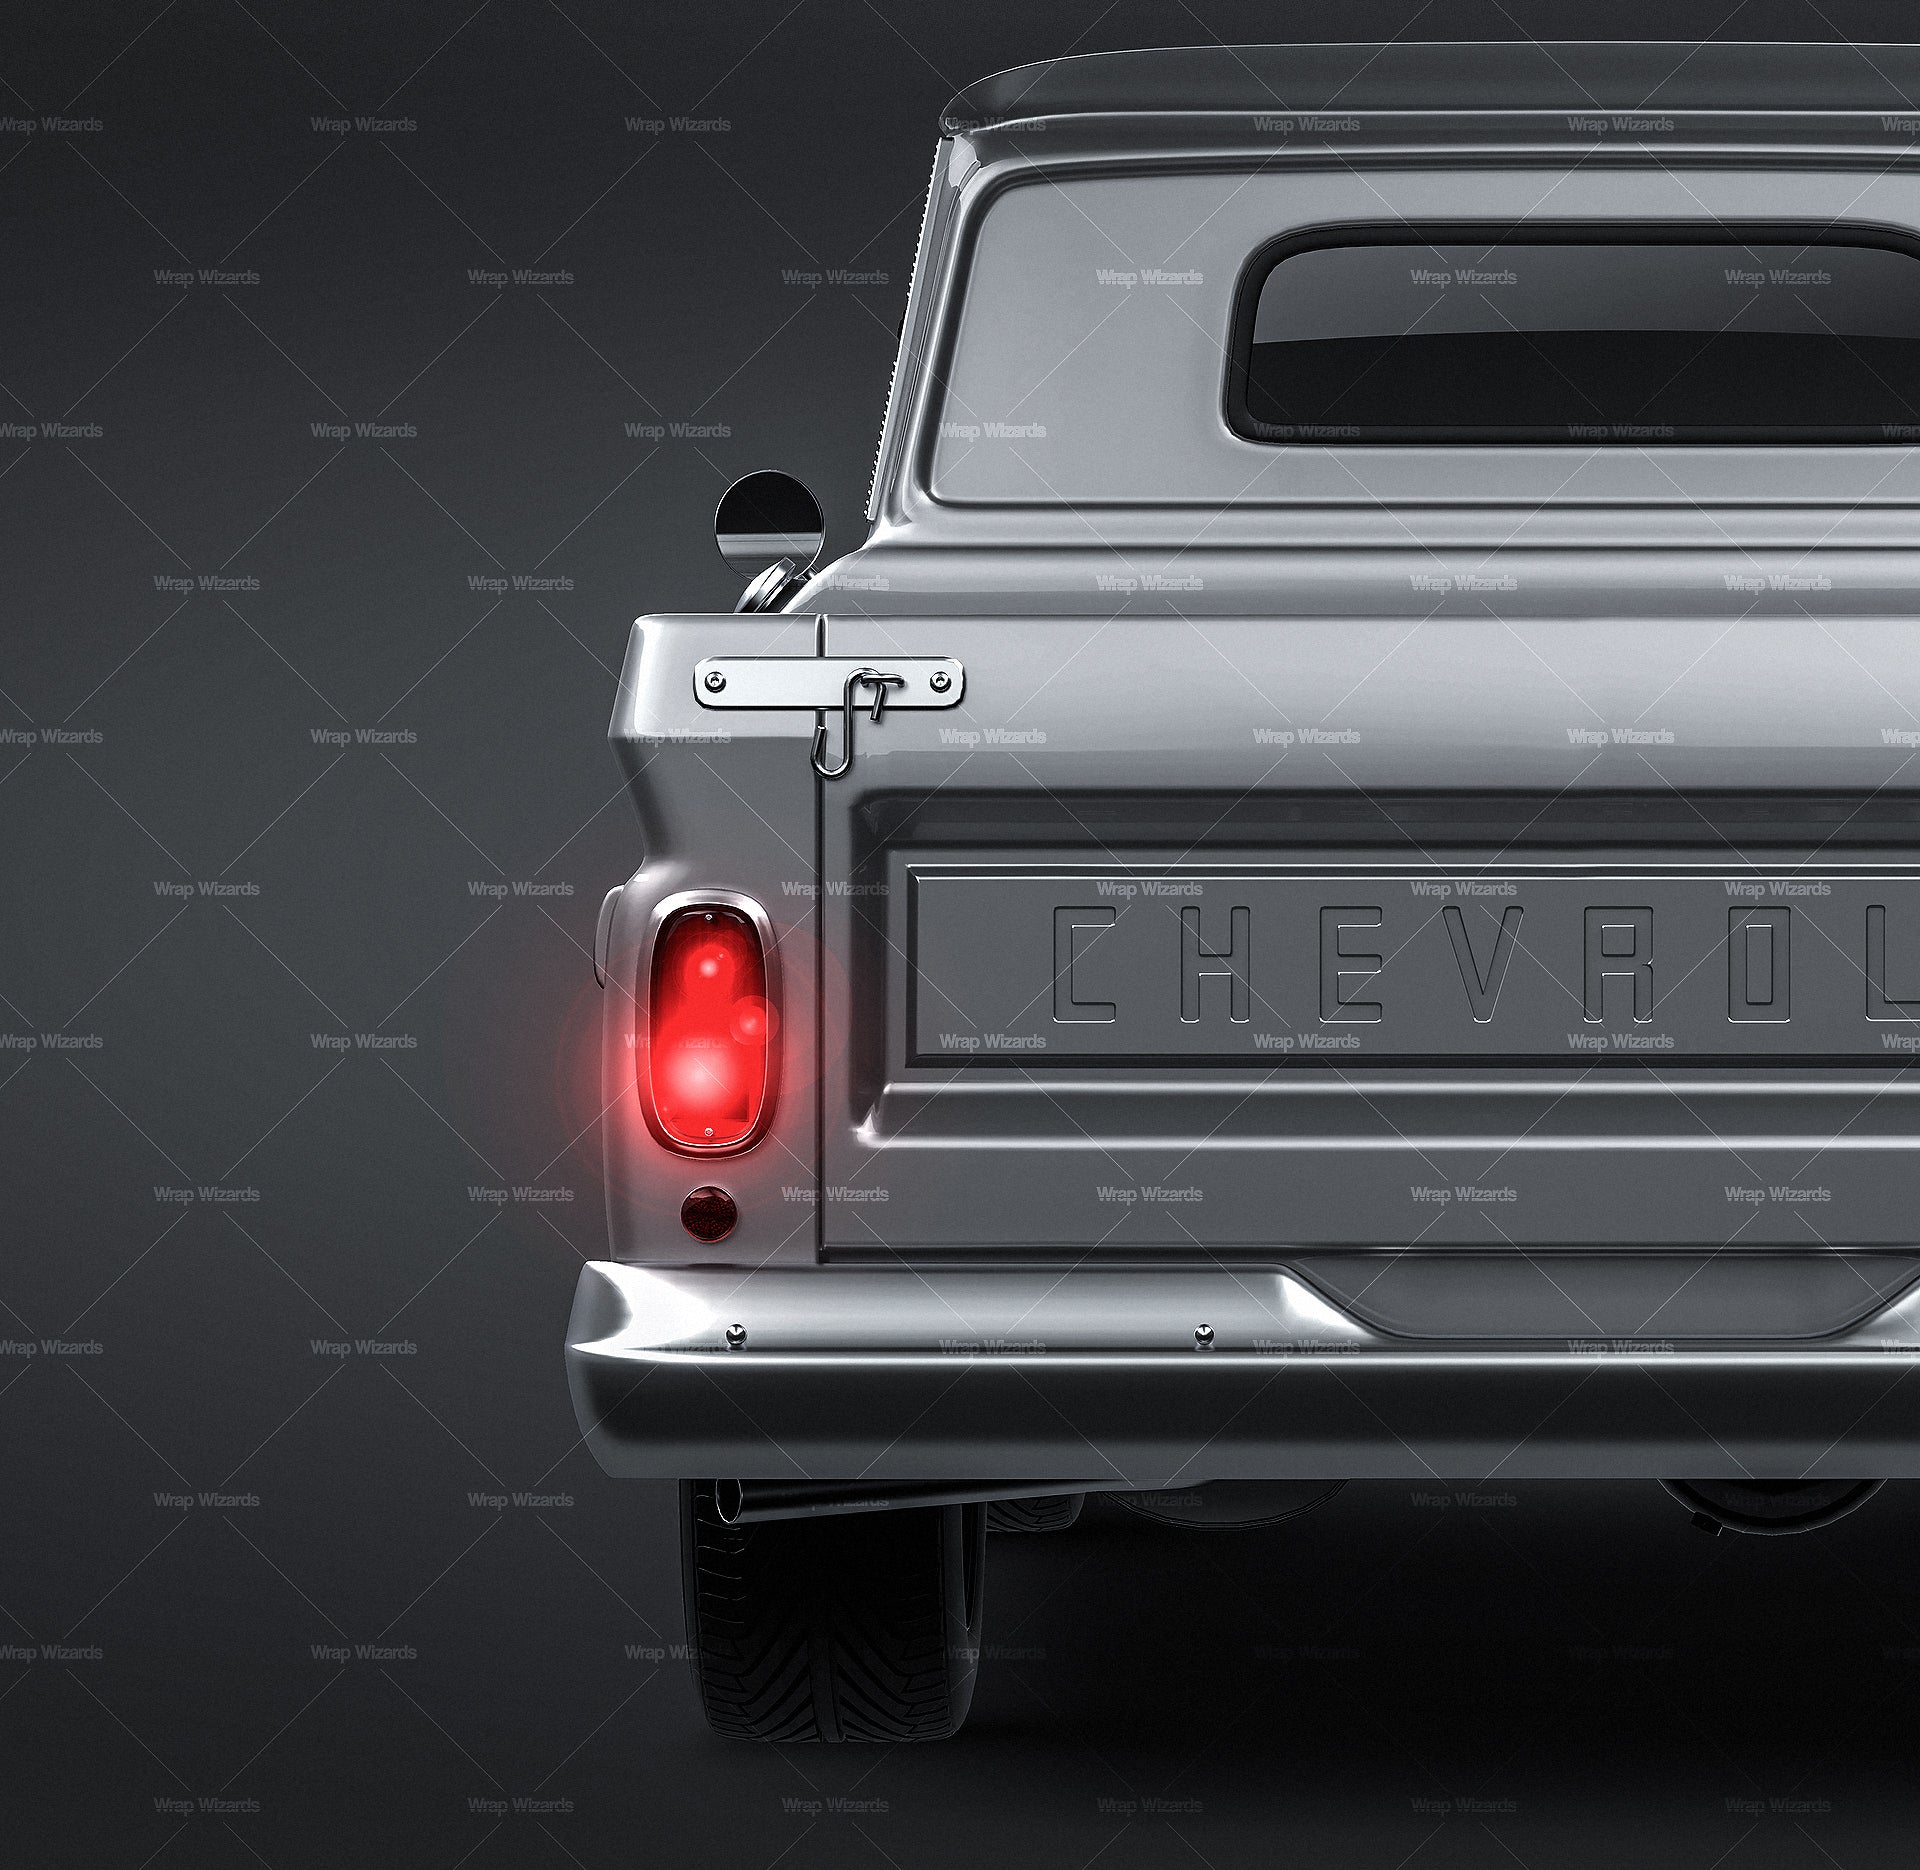 Chevrolet C10 1965 glossy finish - all sides Car Mockup Template.psd